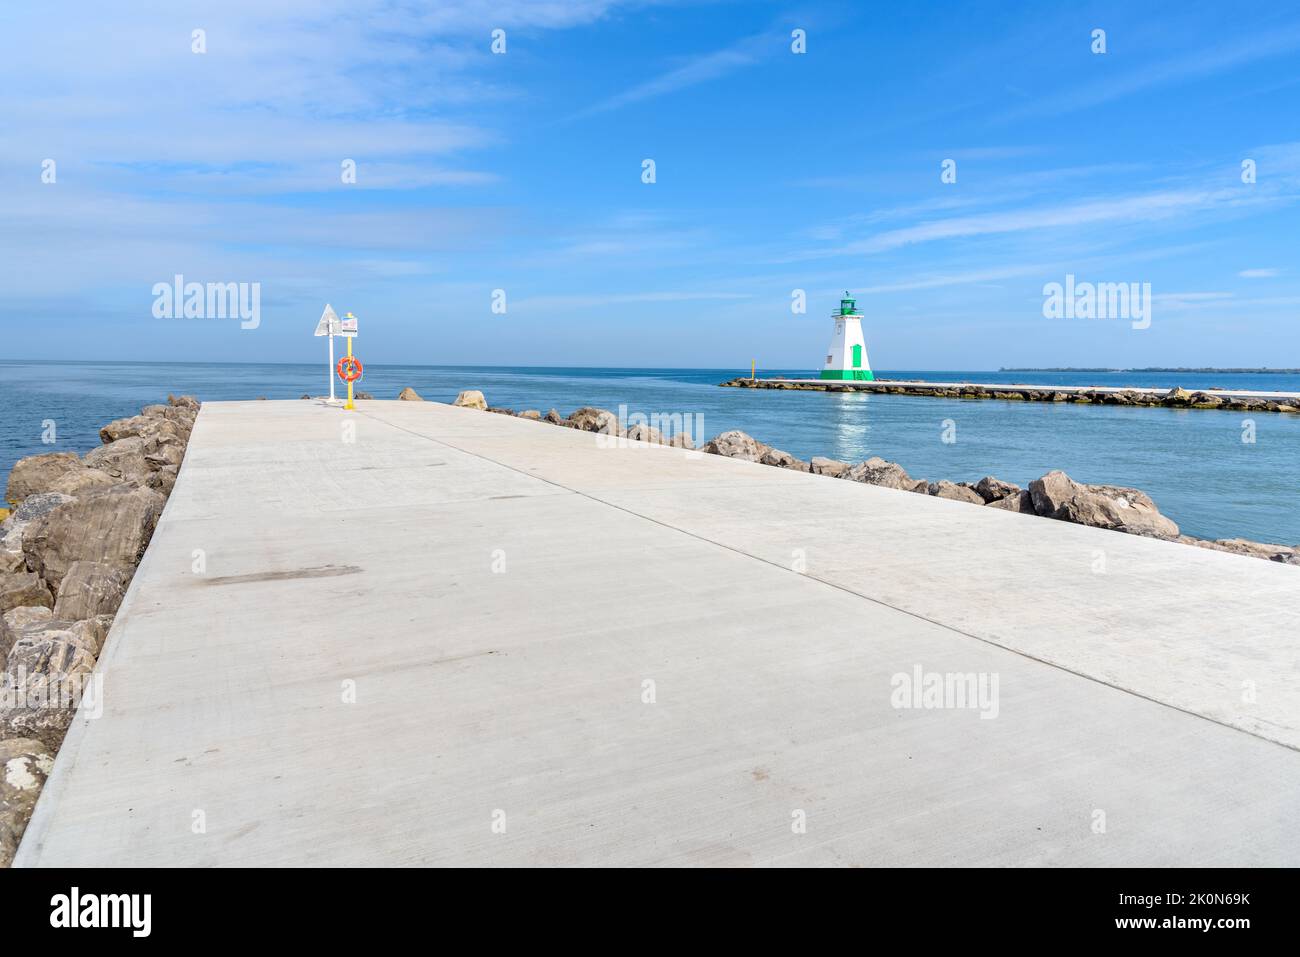 Concrete path on the breakwater at the entrance of a harbour on a lake. A lighthouse is on the breakwater at the other side of the canal. Lake Ontario Stock Photo